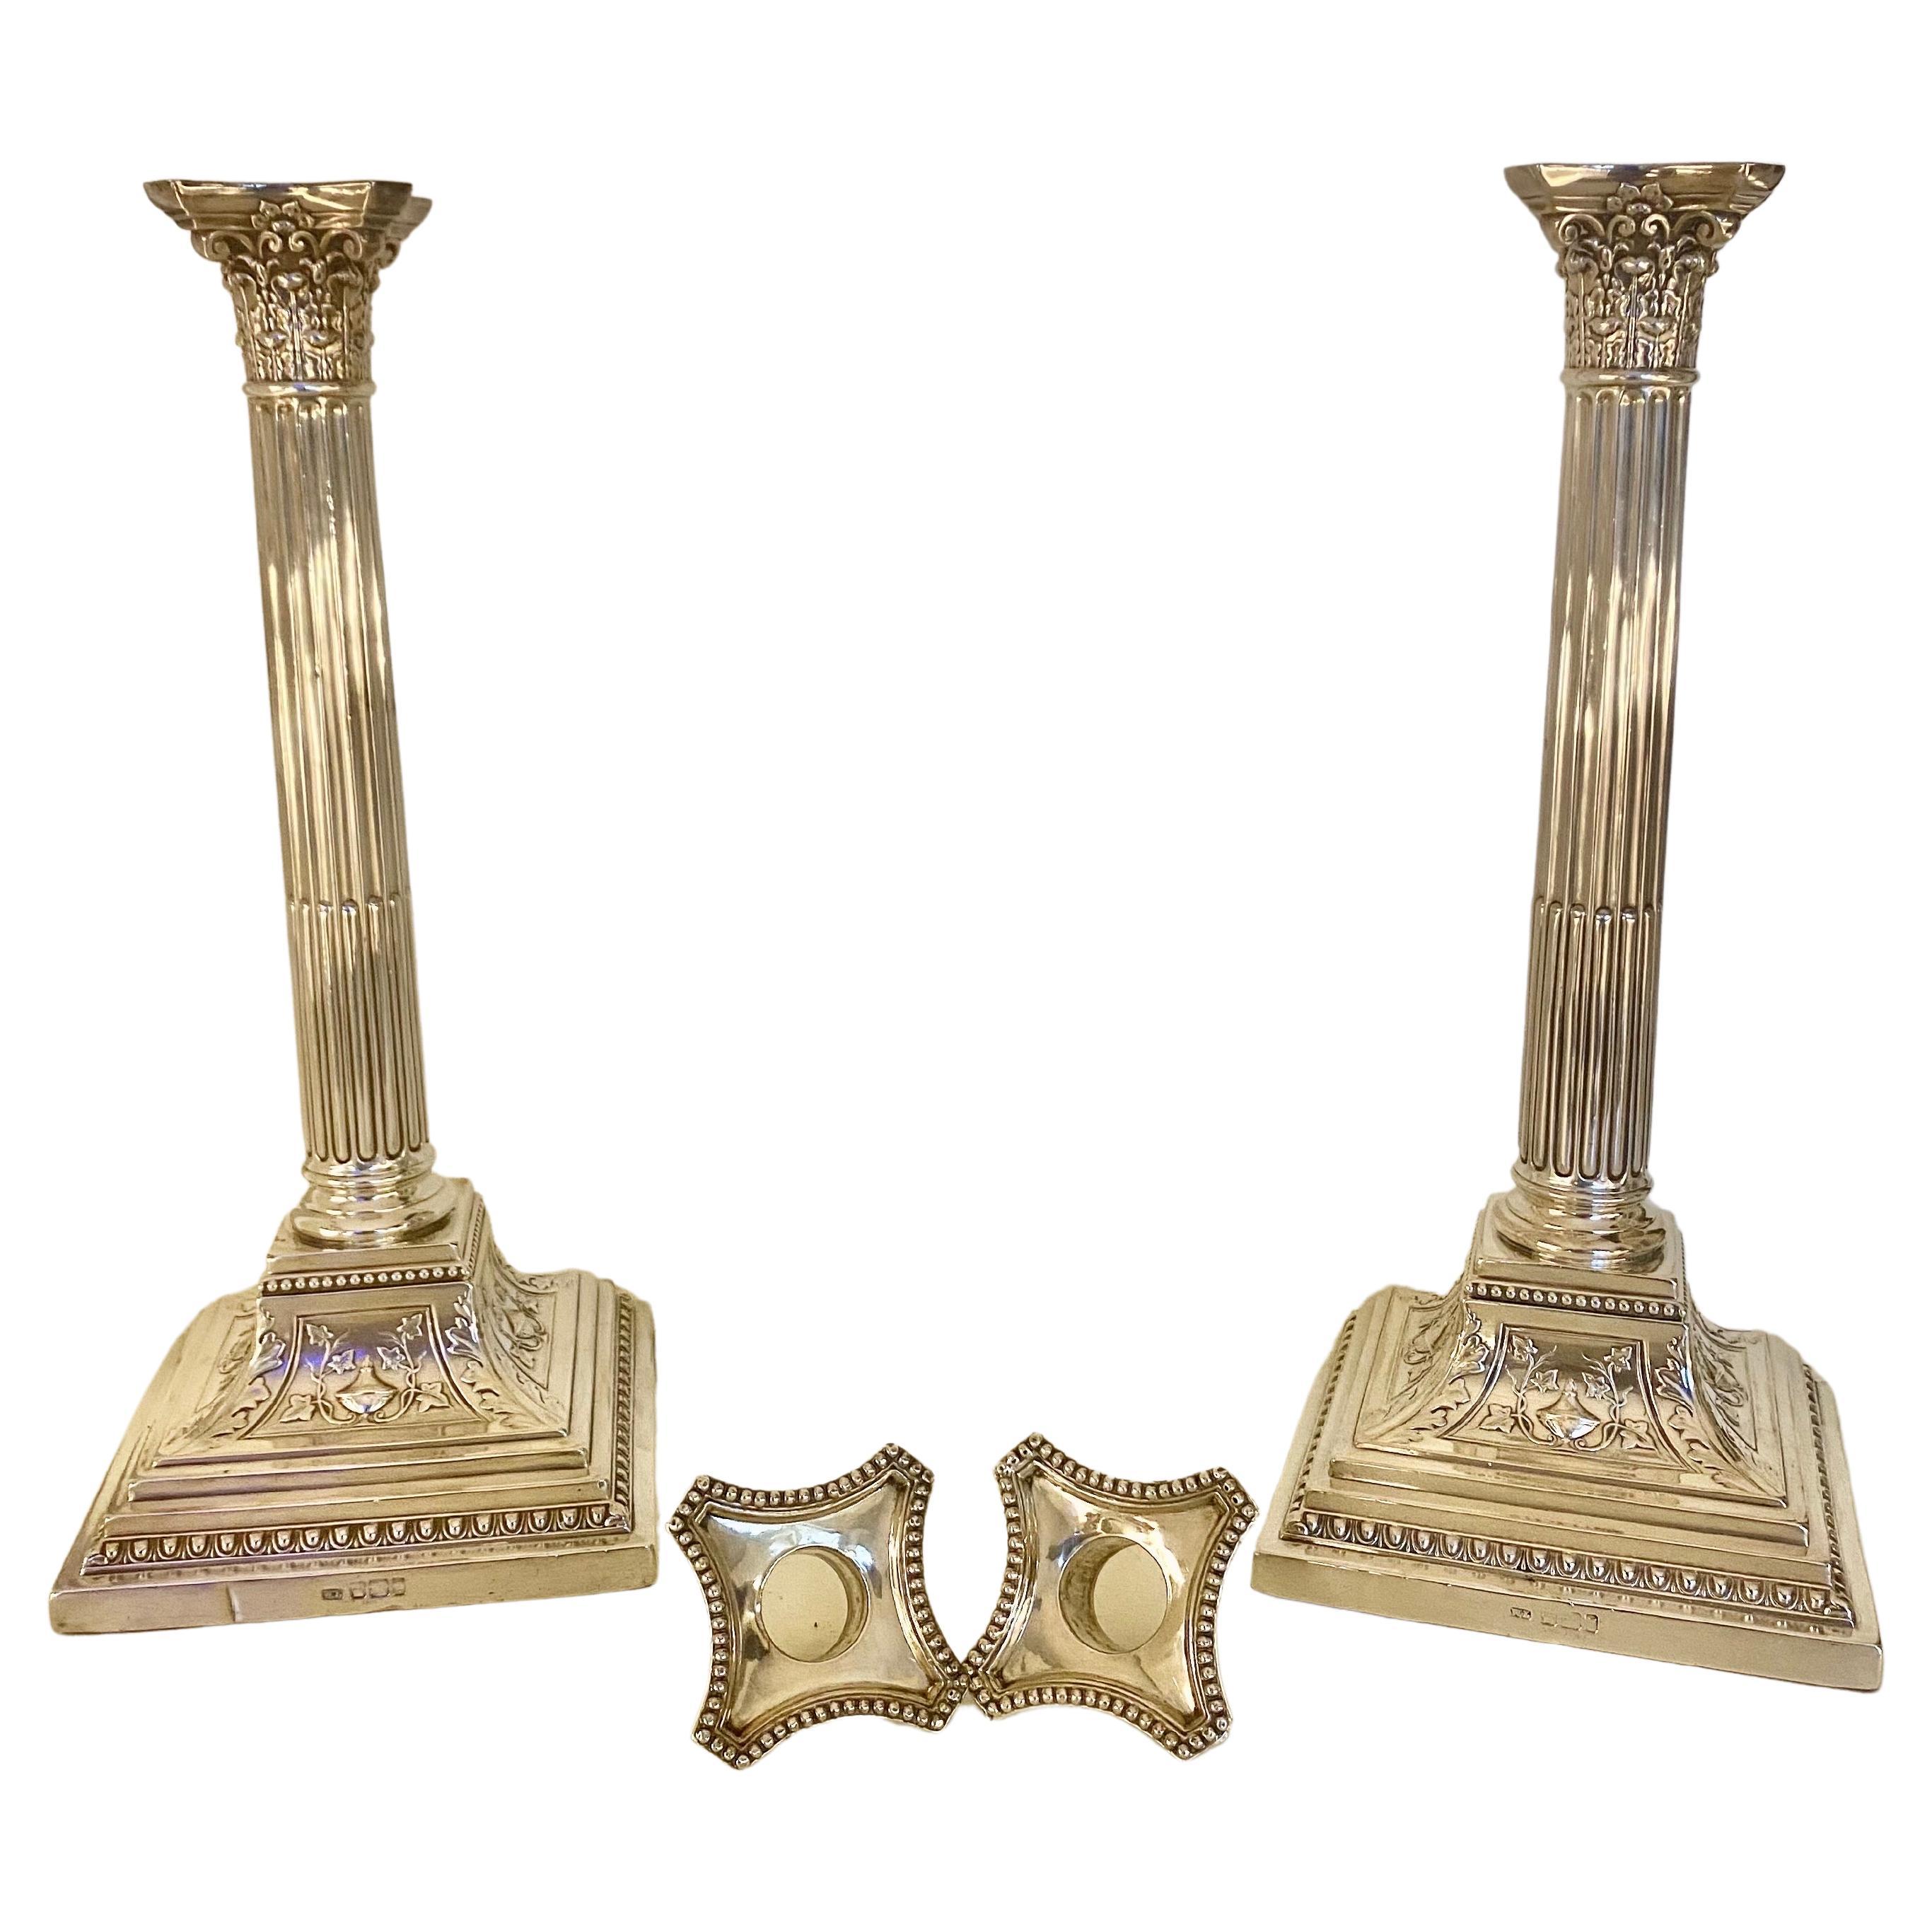 Neoclassical Revival Large Pr Neoclassical Victorian Sterling Silver Corinthian Column Candlesticks For Sale